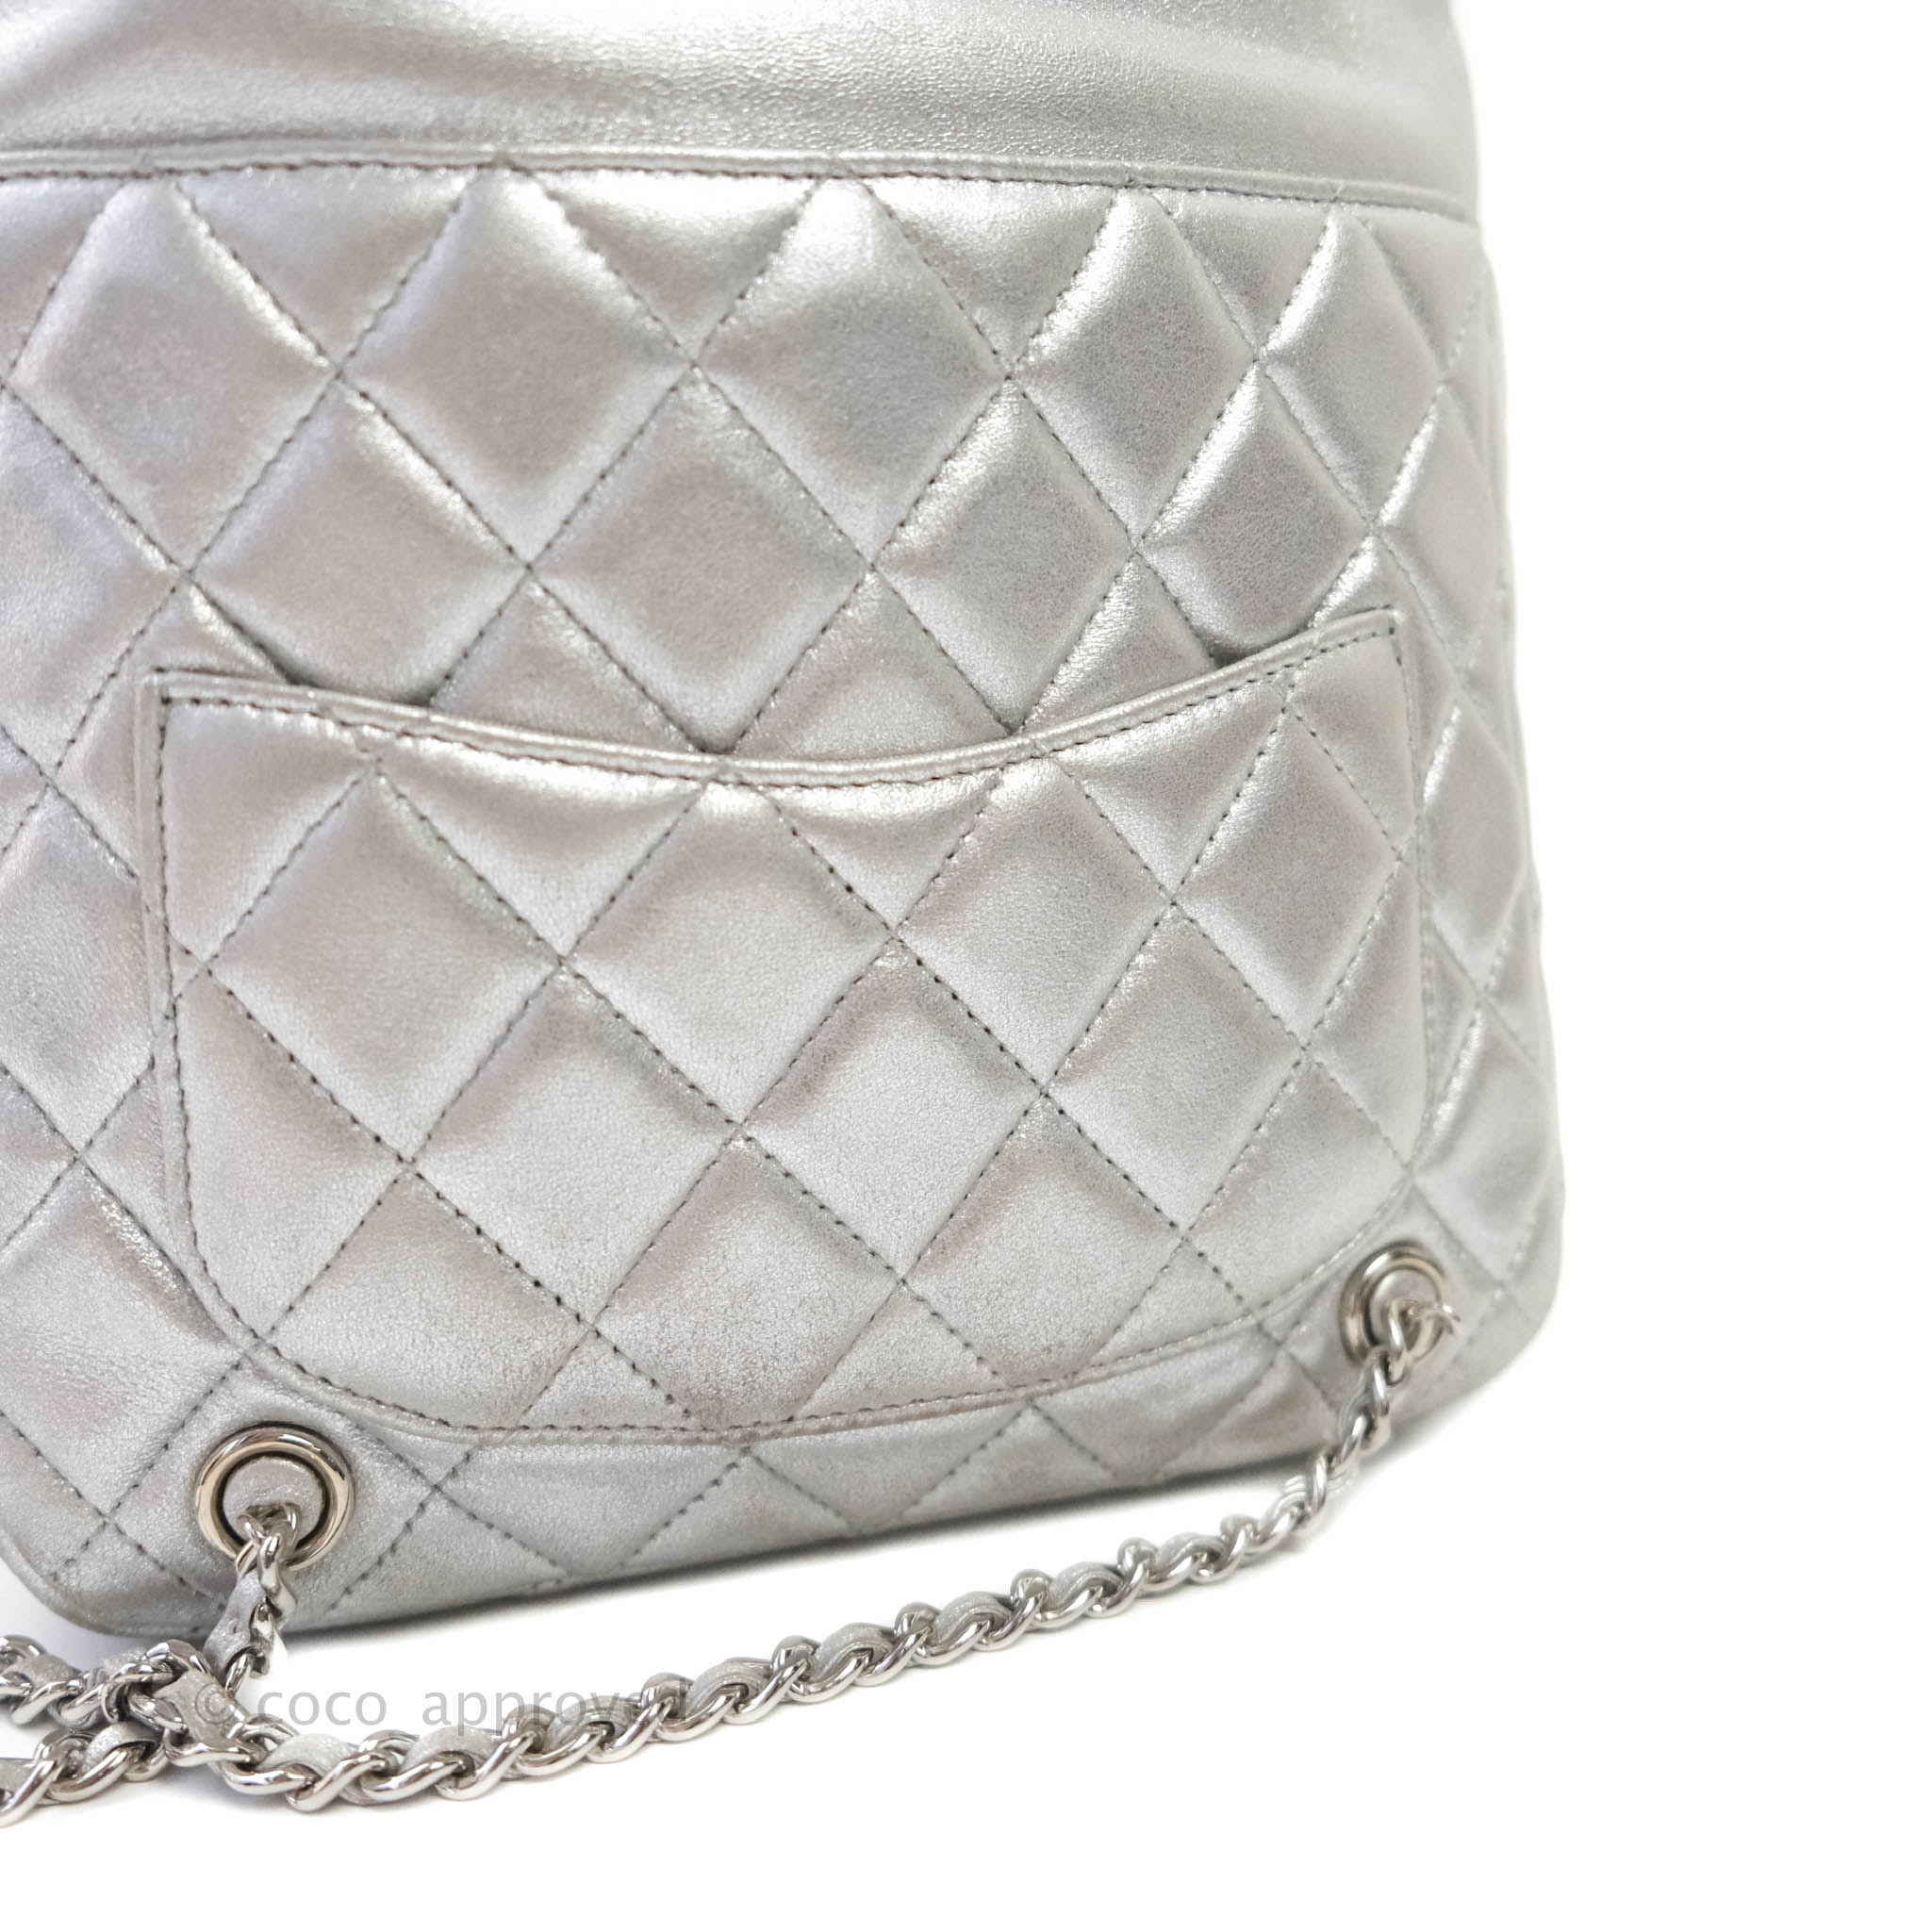 Chanel Metallic Light Gold Lambskin Quilted Small Seoul Backpack